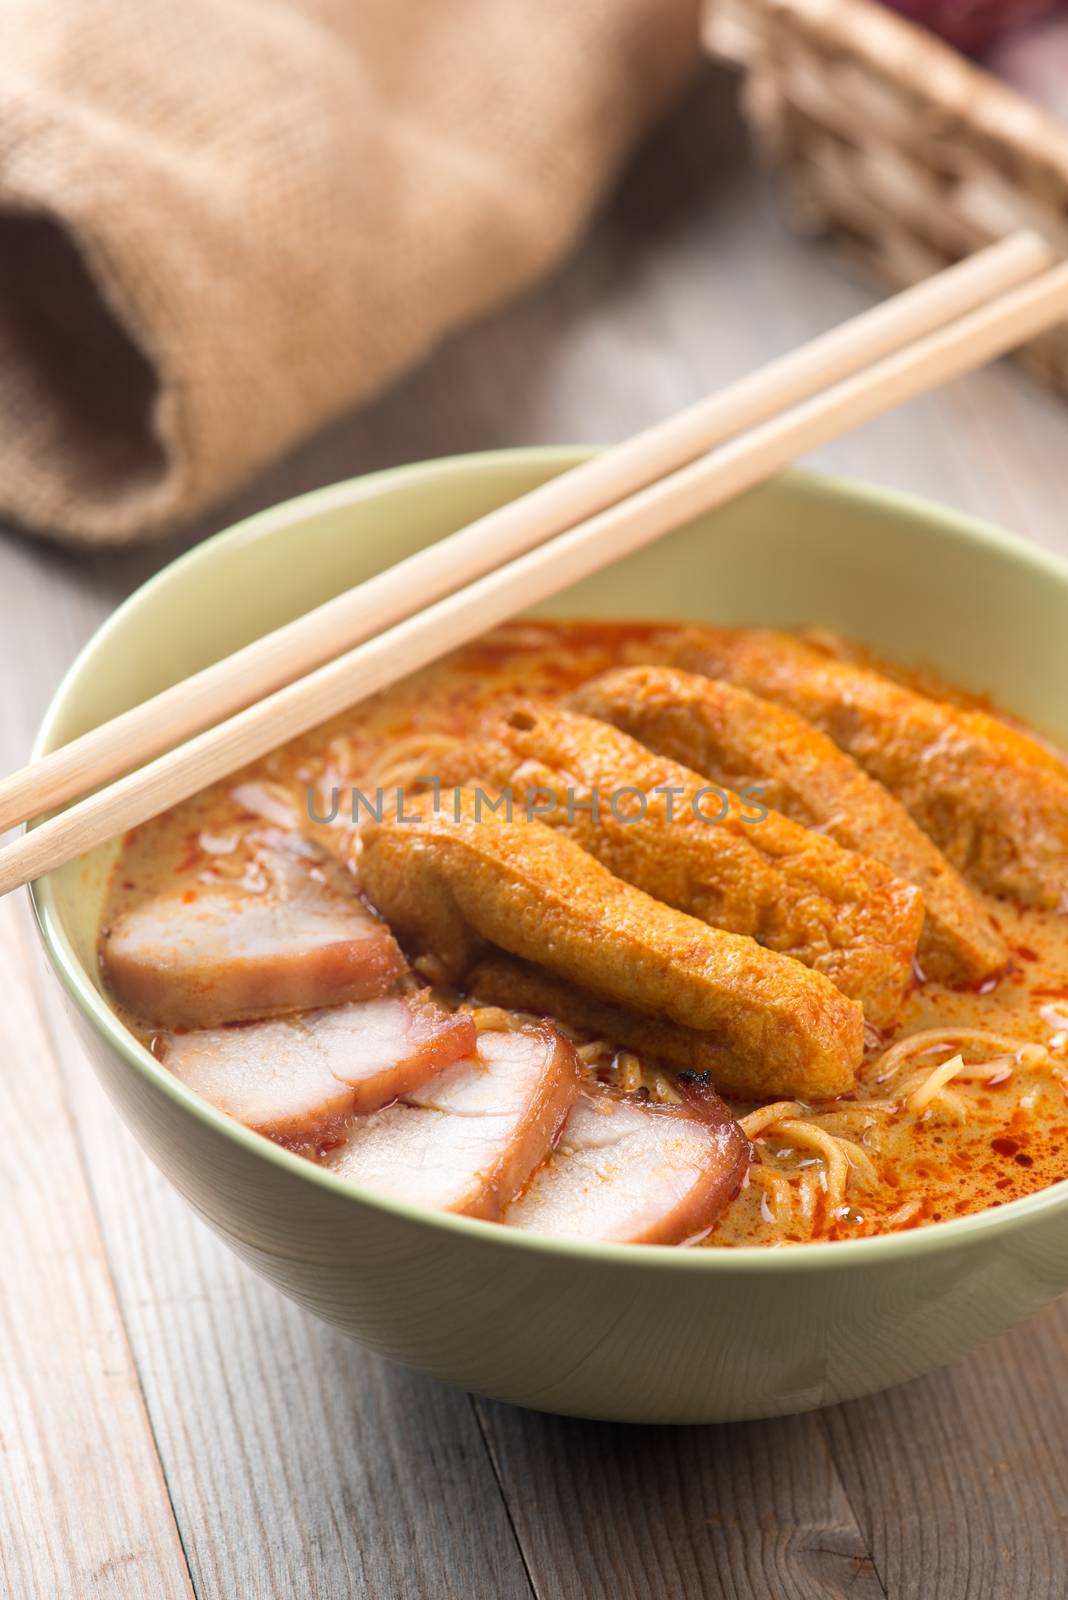 Hot and spicy Singaporean Curry Noodle or laksa mee, serve with chopsticks. Singapore cuisine.